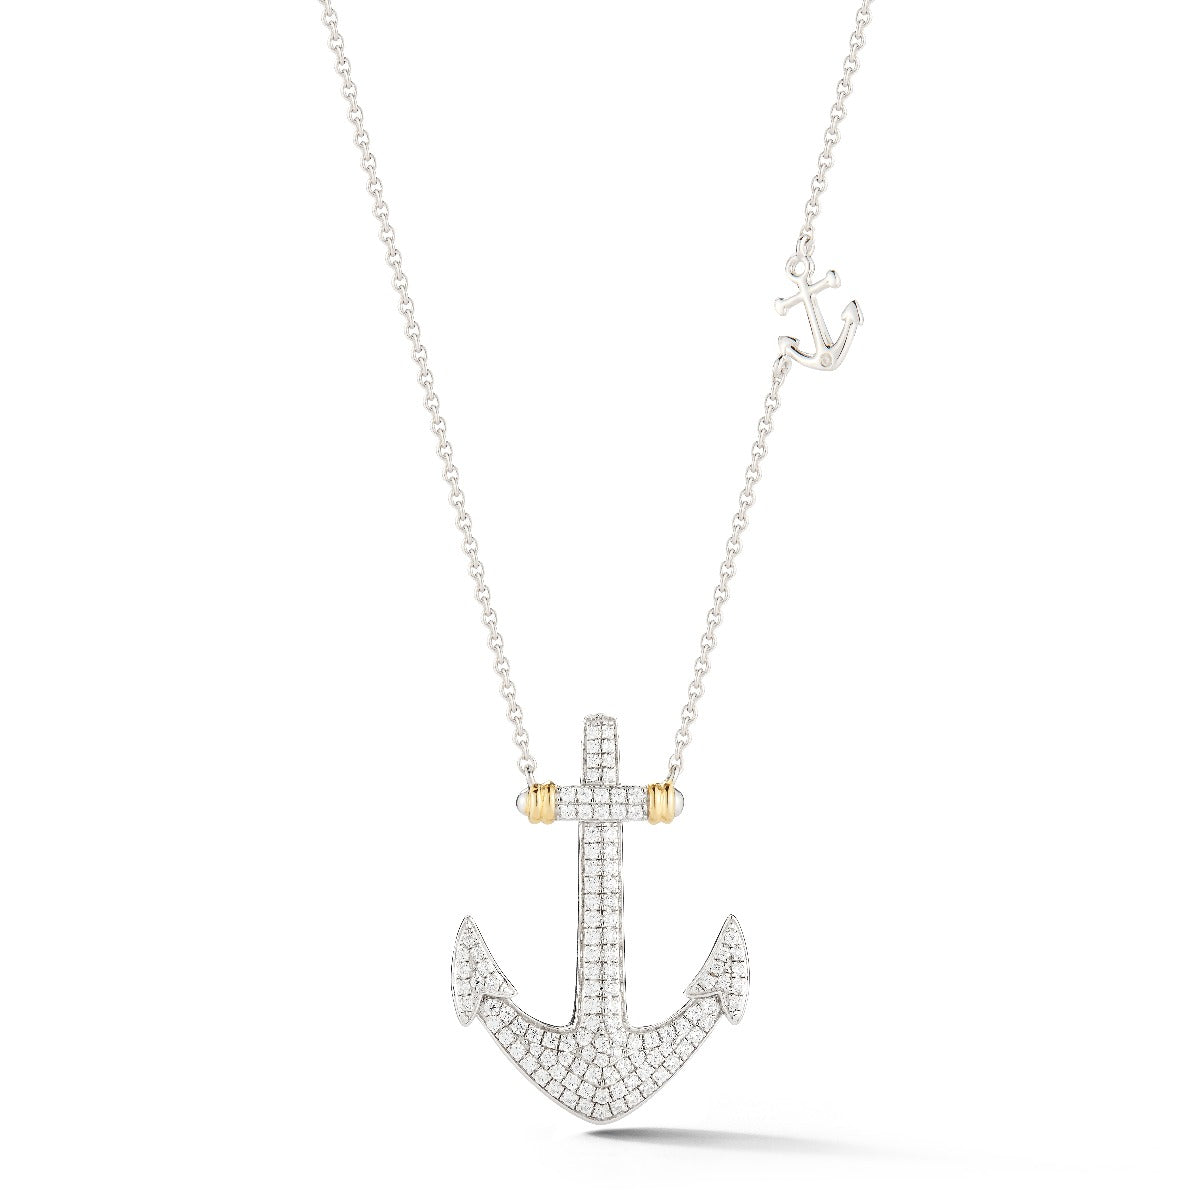 14K DIAMOND PAVE ANCHOR WITH 0.57CT DIAMONDS AND SMALL ANCHOR ON CHAIN.  1 INCH LONG BY 3/4 ON 18 INCHES CHAIN